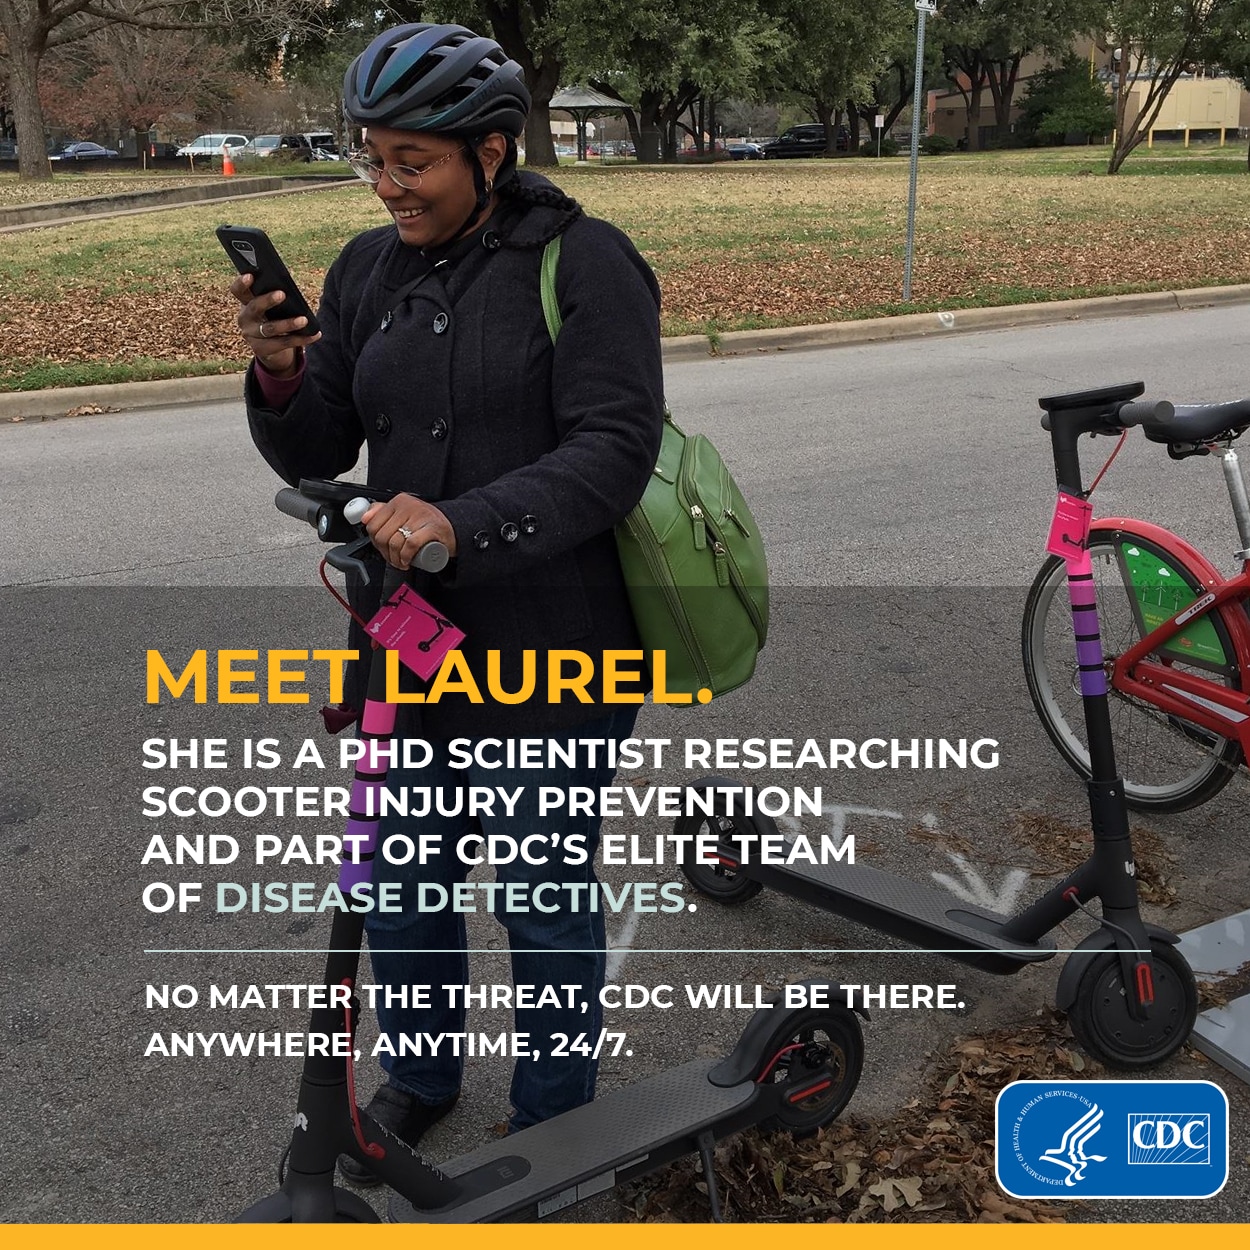 Meet Laurel. She's a PhD Scientist researching scooter injury prevention and part of CDC's elite team of disease detectives.